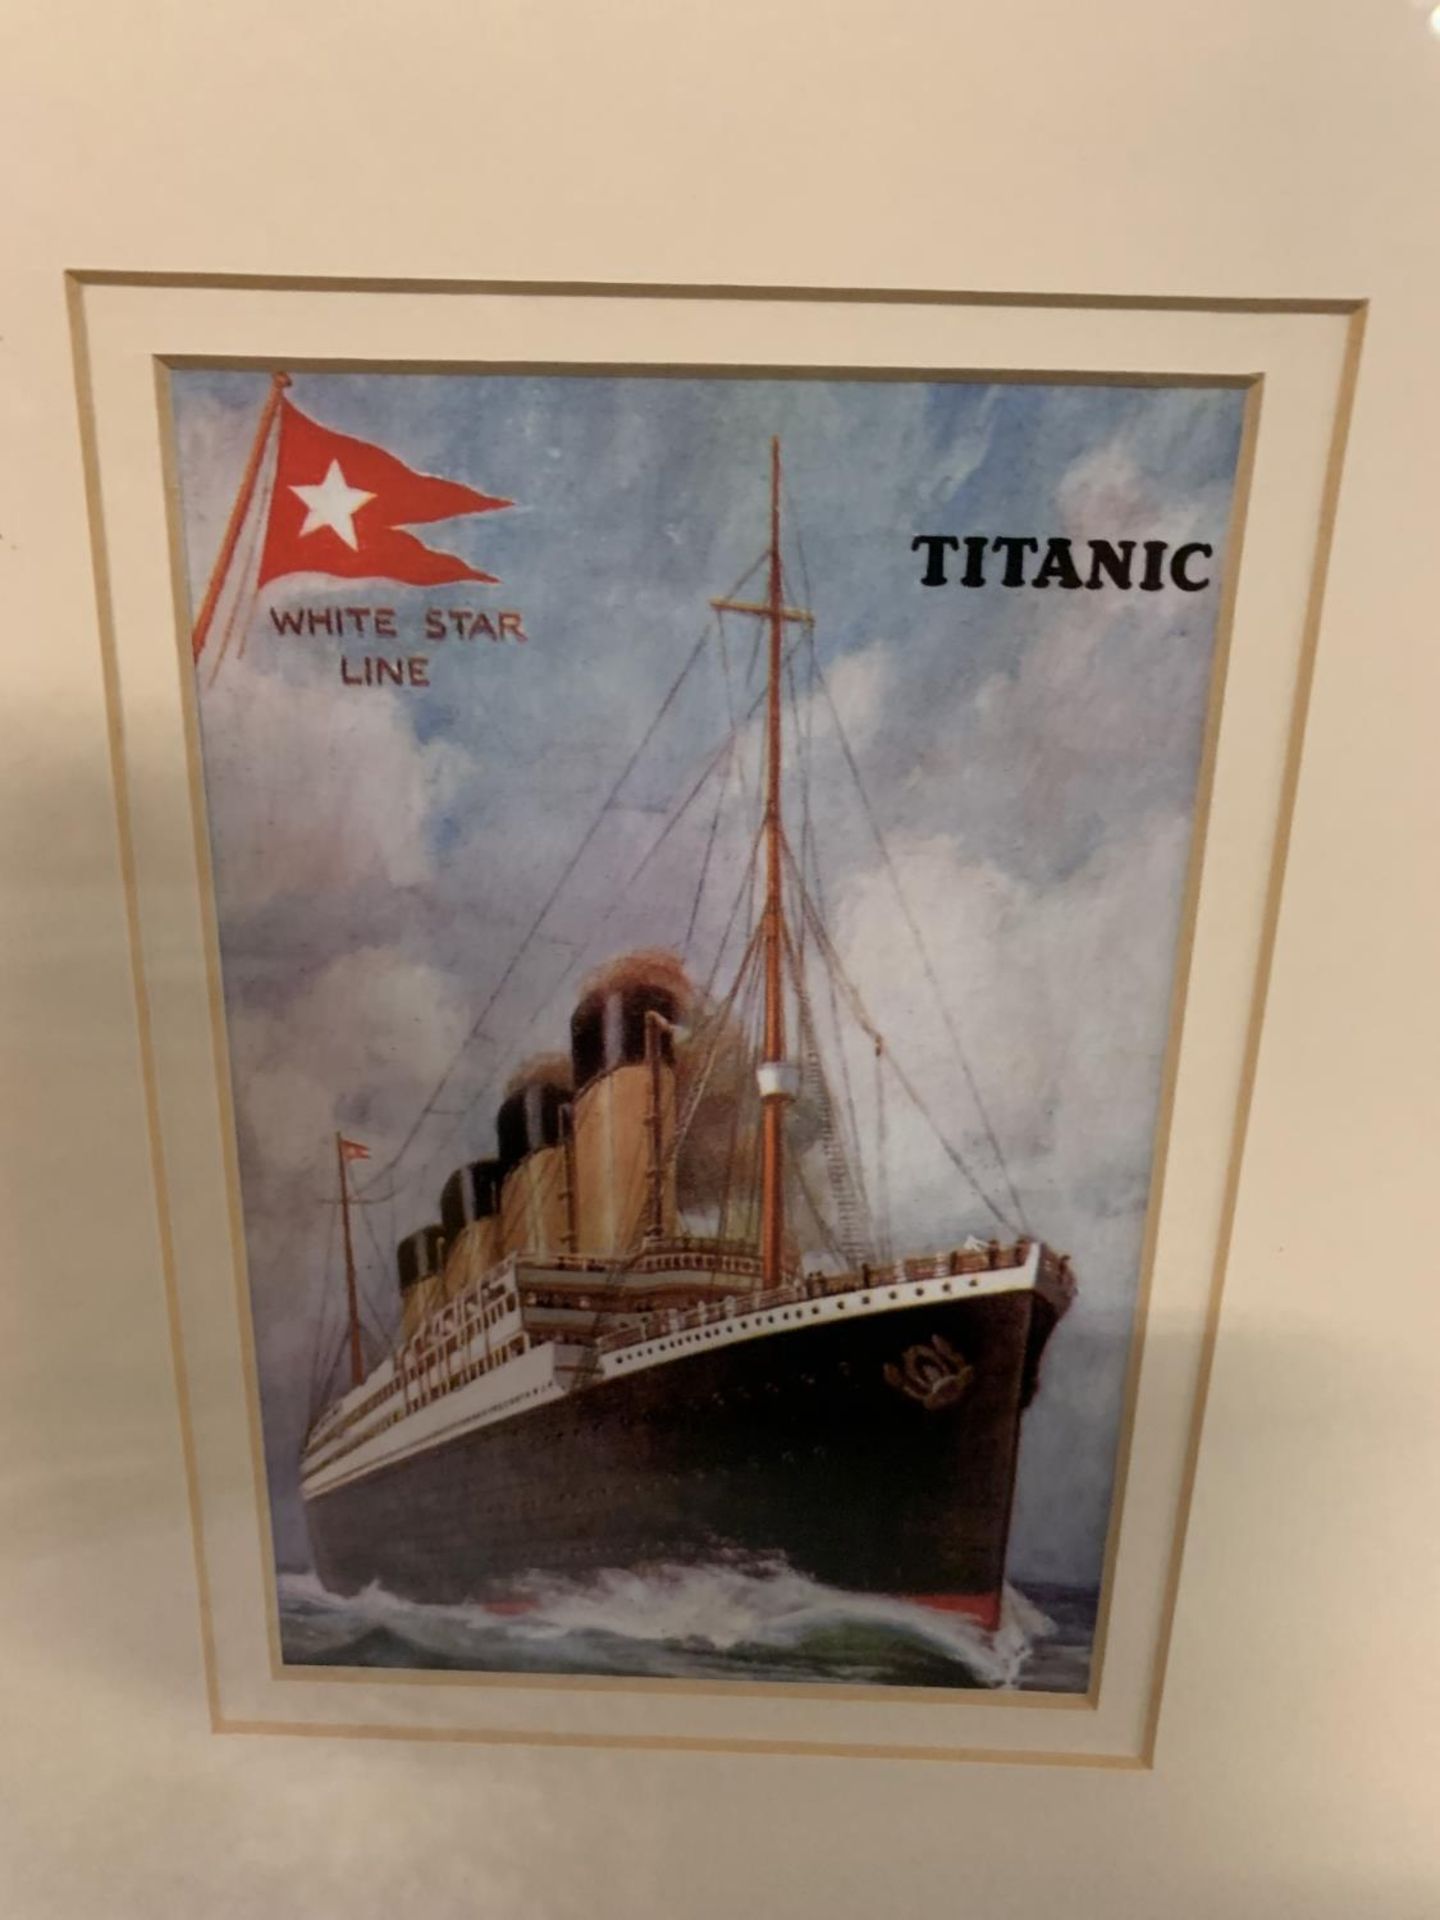 A PAIR OF FRAMED 'TITANIC' PRINTS - Image 3 of 3